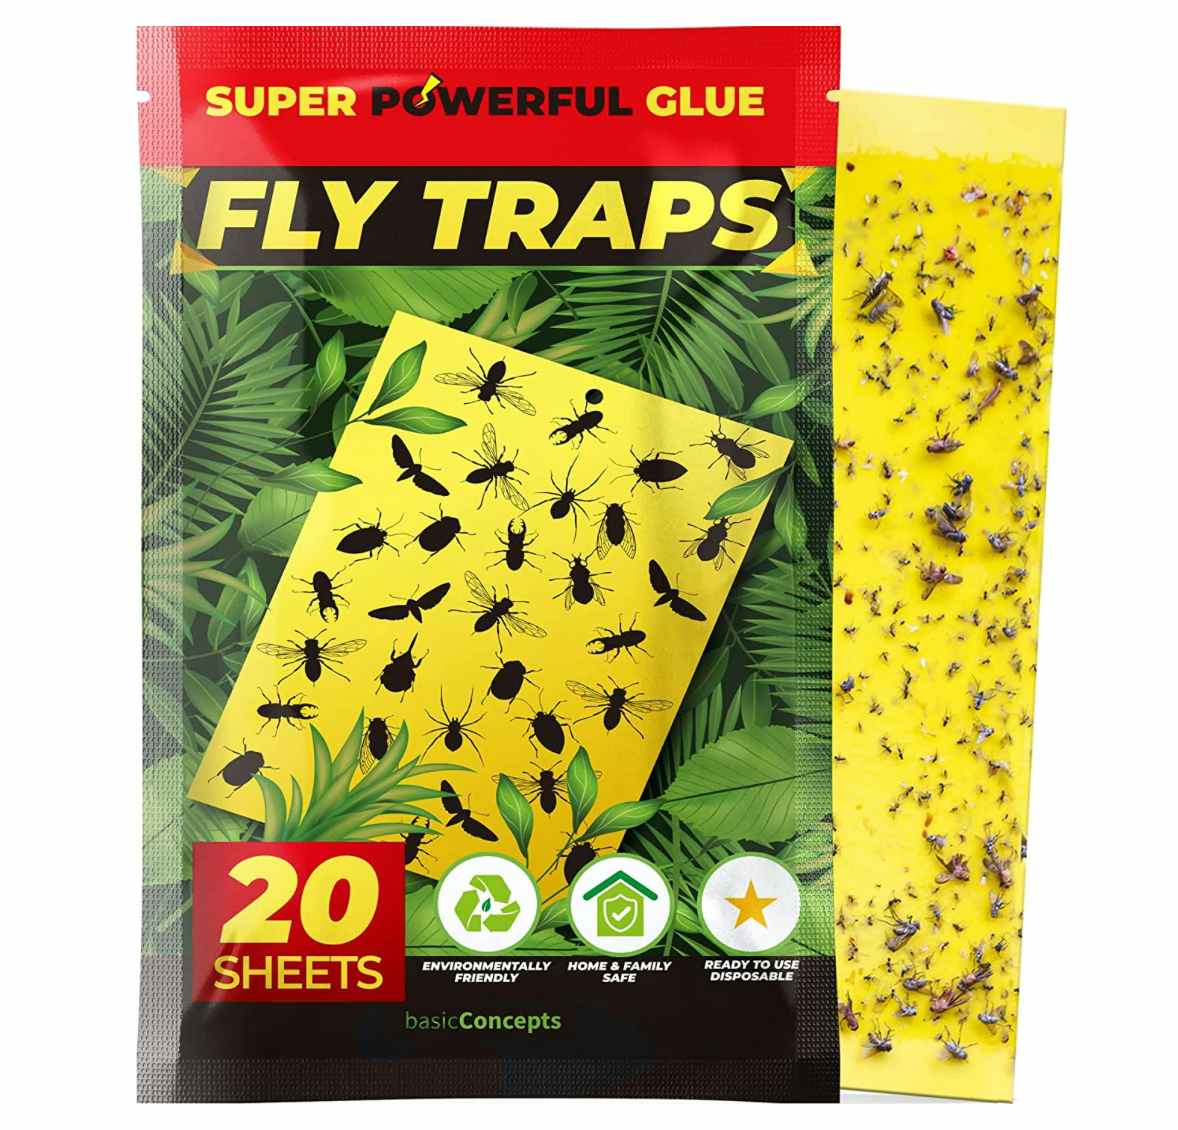 Yellow, green, and red fly trap box